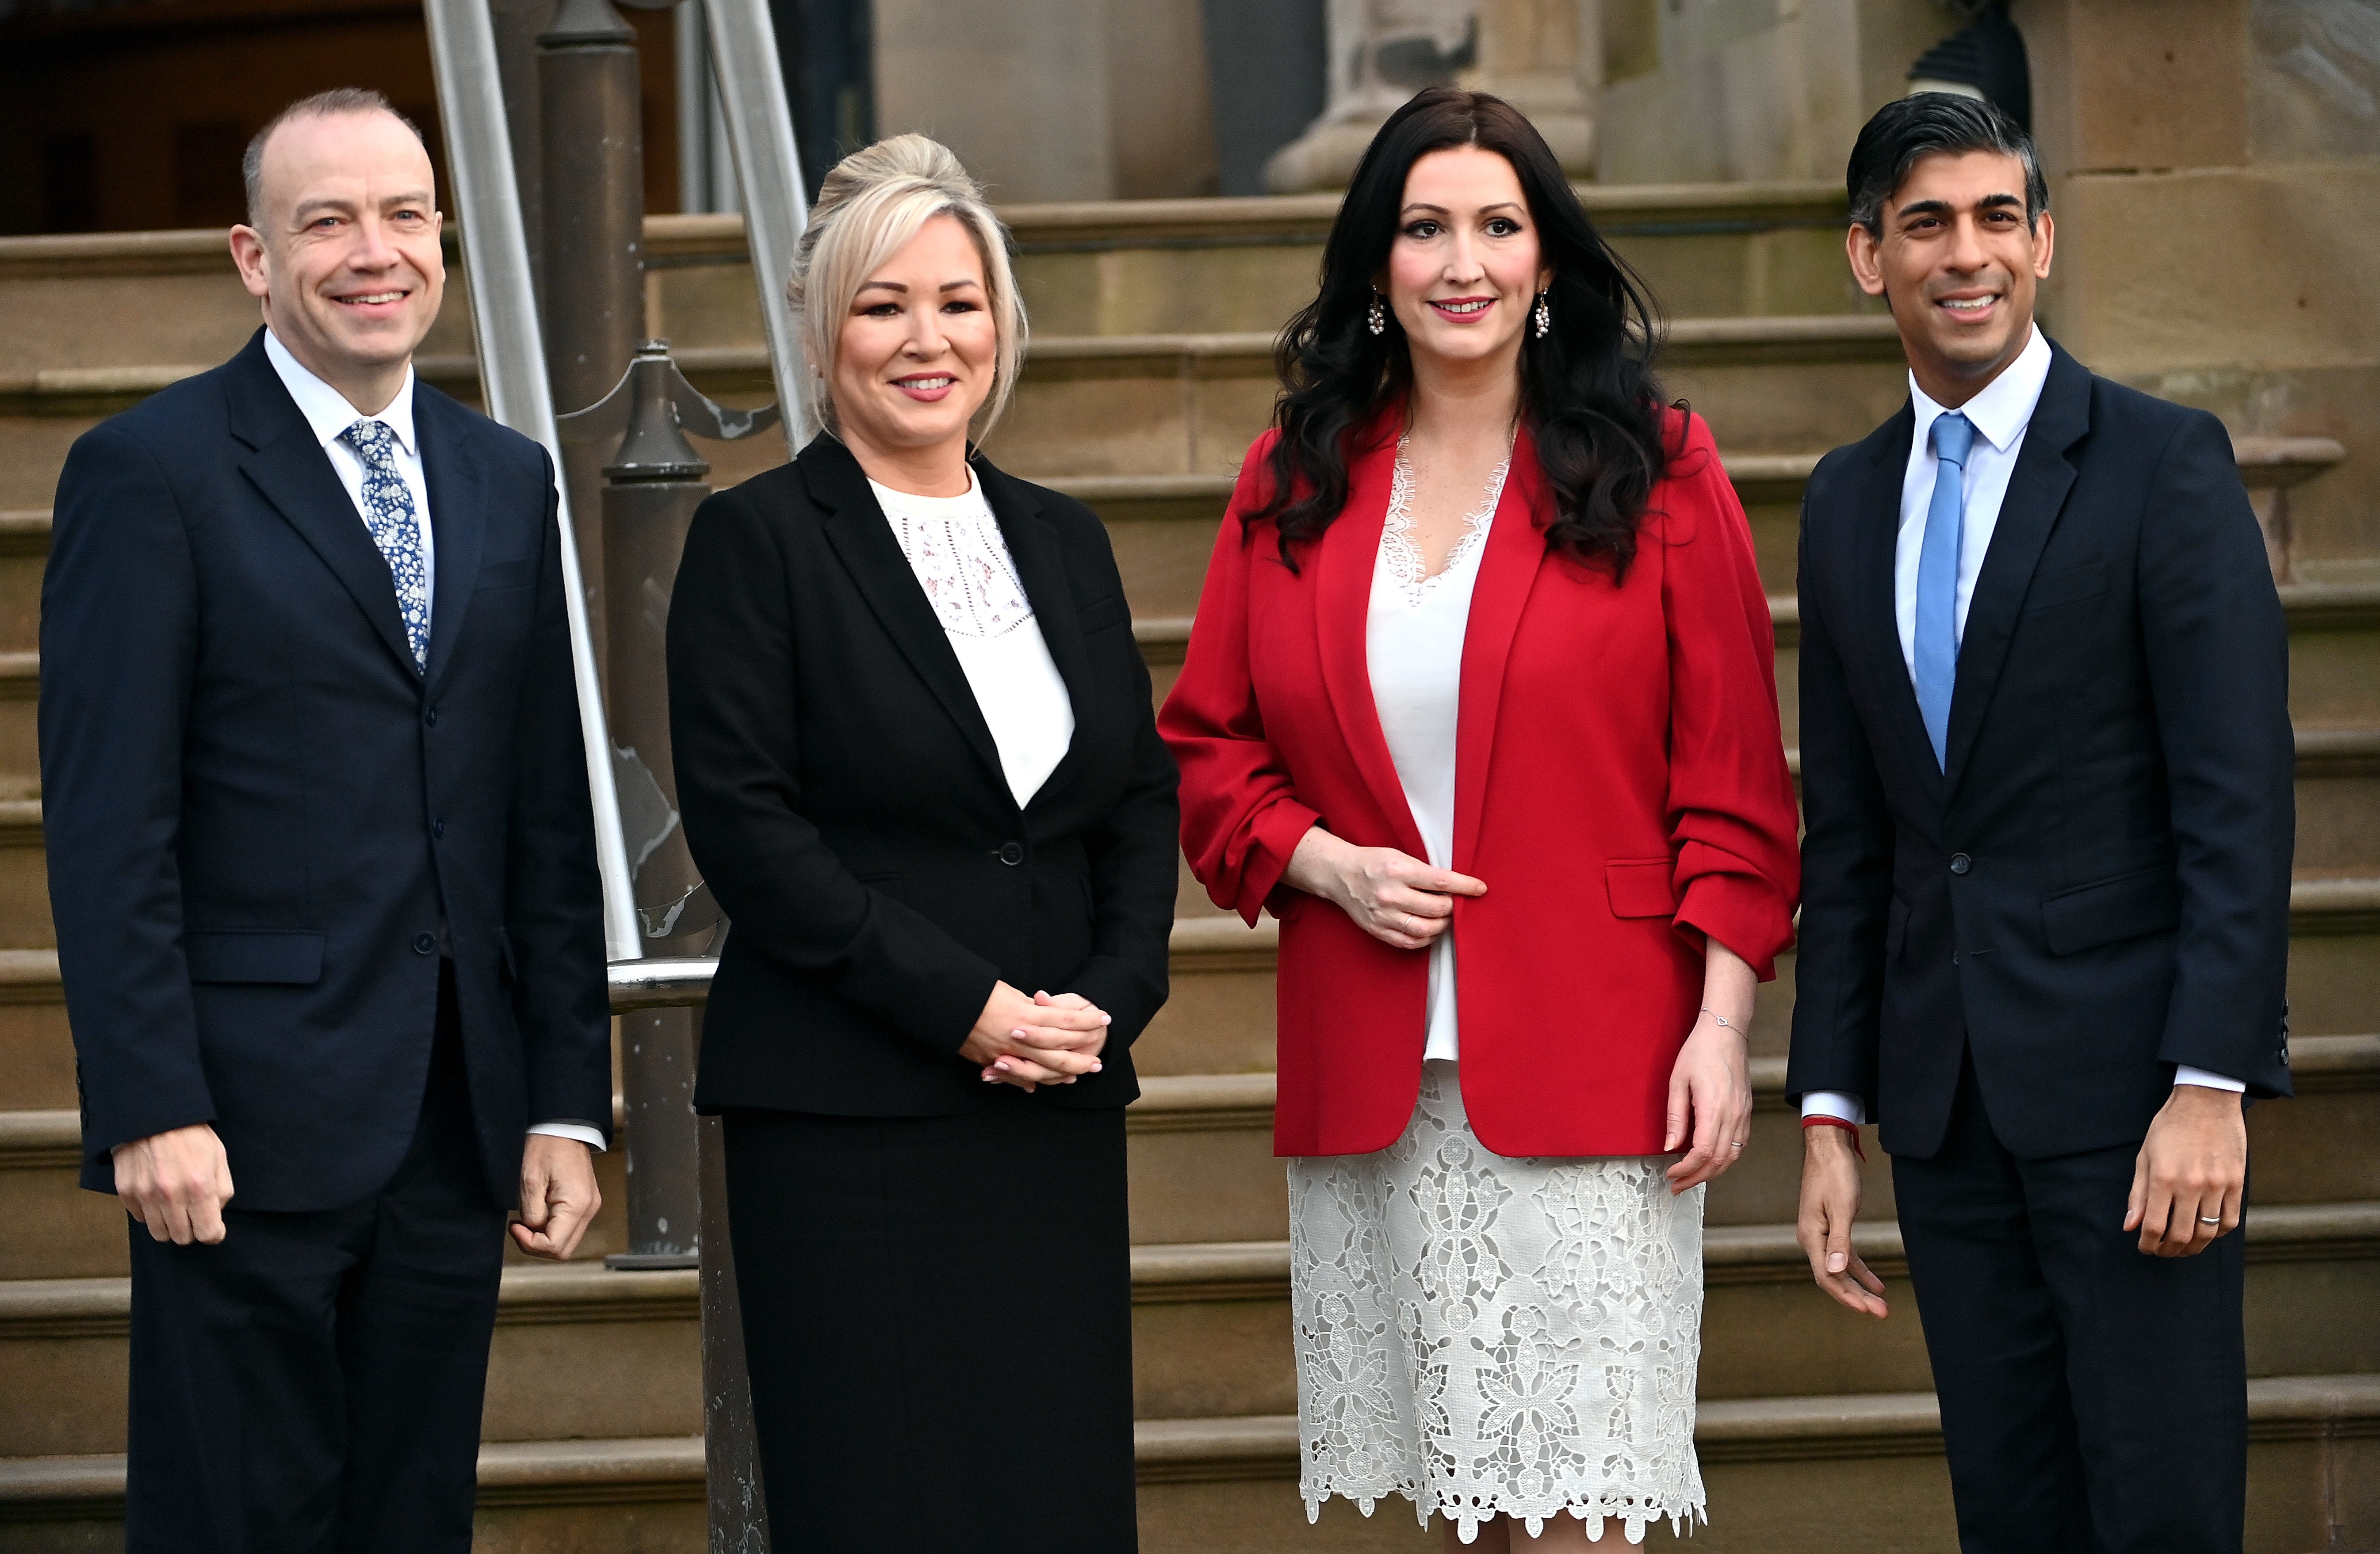 NI secretary Chris Heaton-Harris, first minister Michelle O’Neill, deputy first minister Emma Little-Pengelly and Rishi Sunak at Stormont Castle